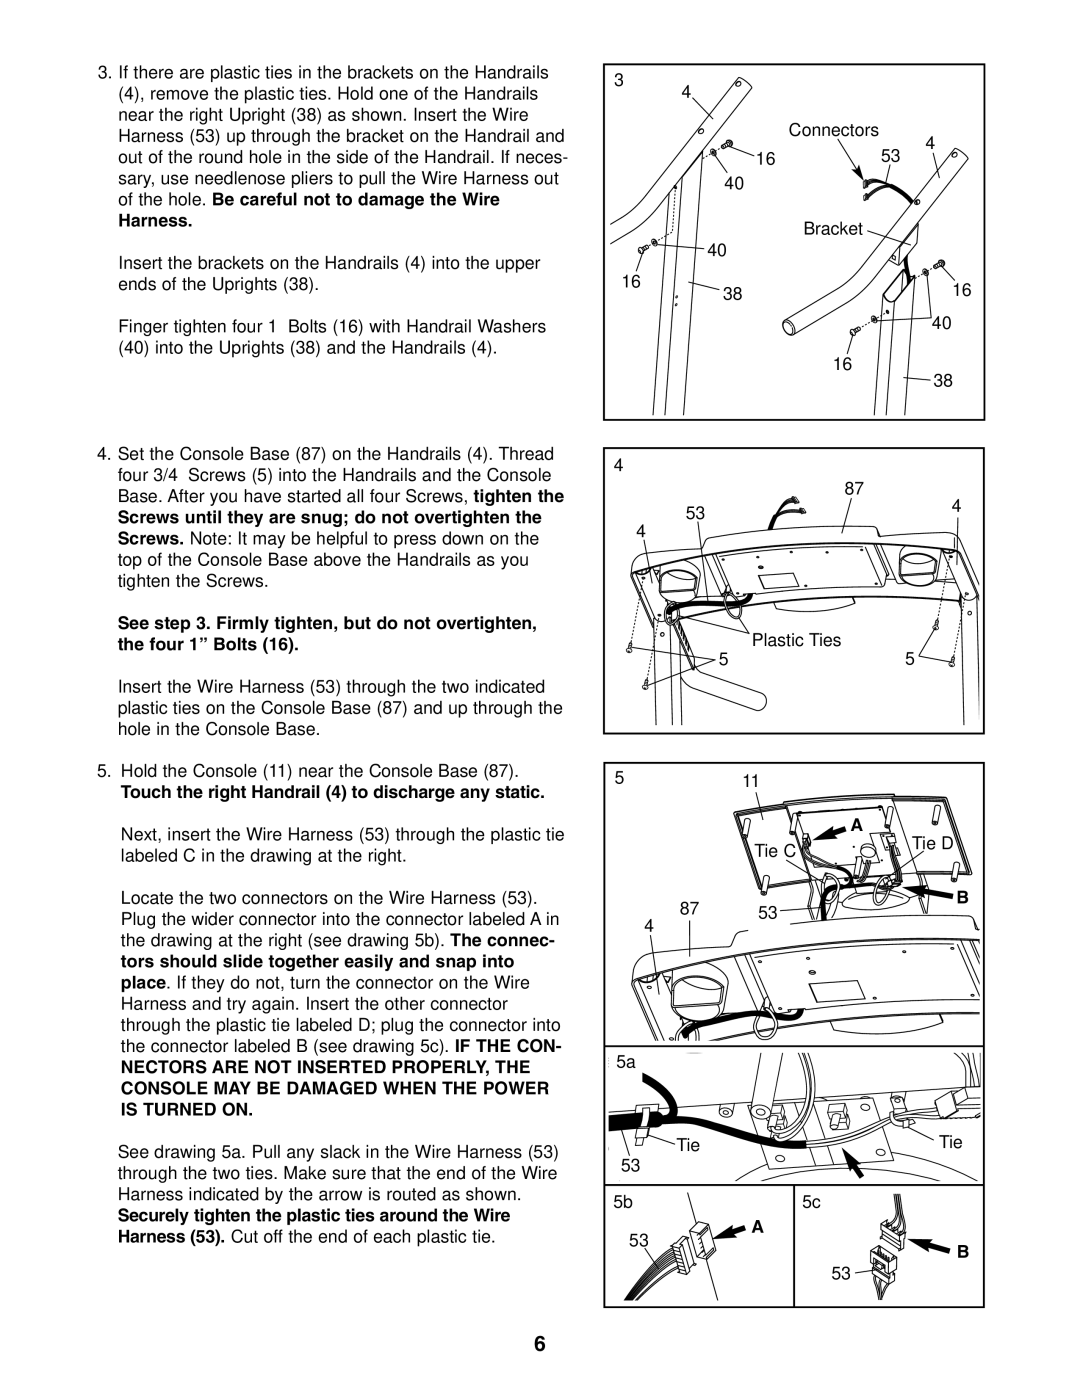 Weslo 831.295021 user manual Harness, Touch the right Handrail 4 to discharge any static 